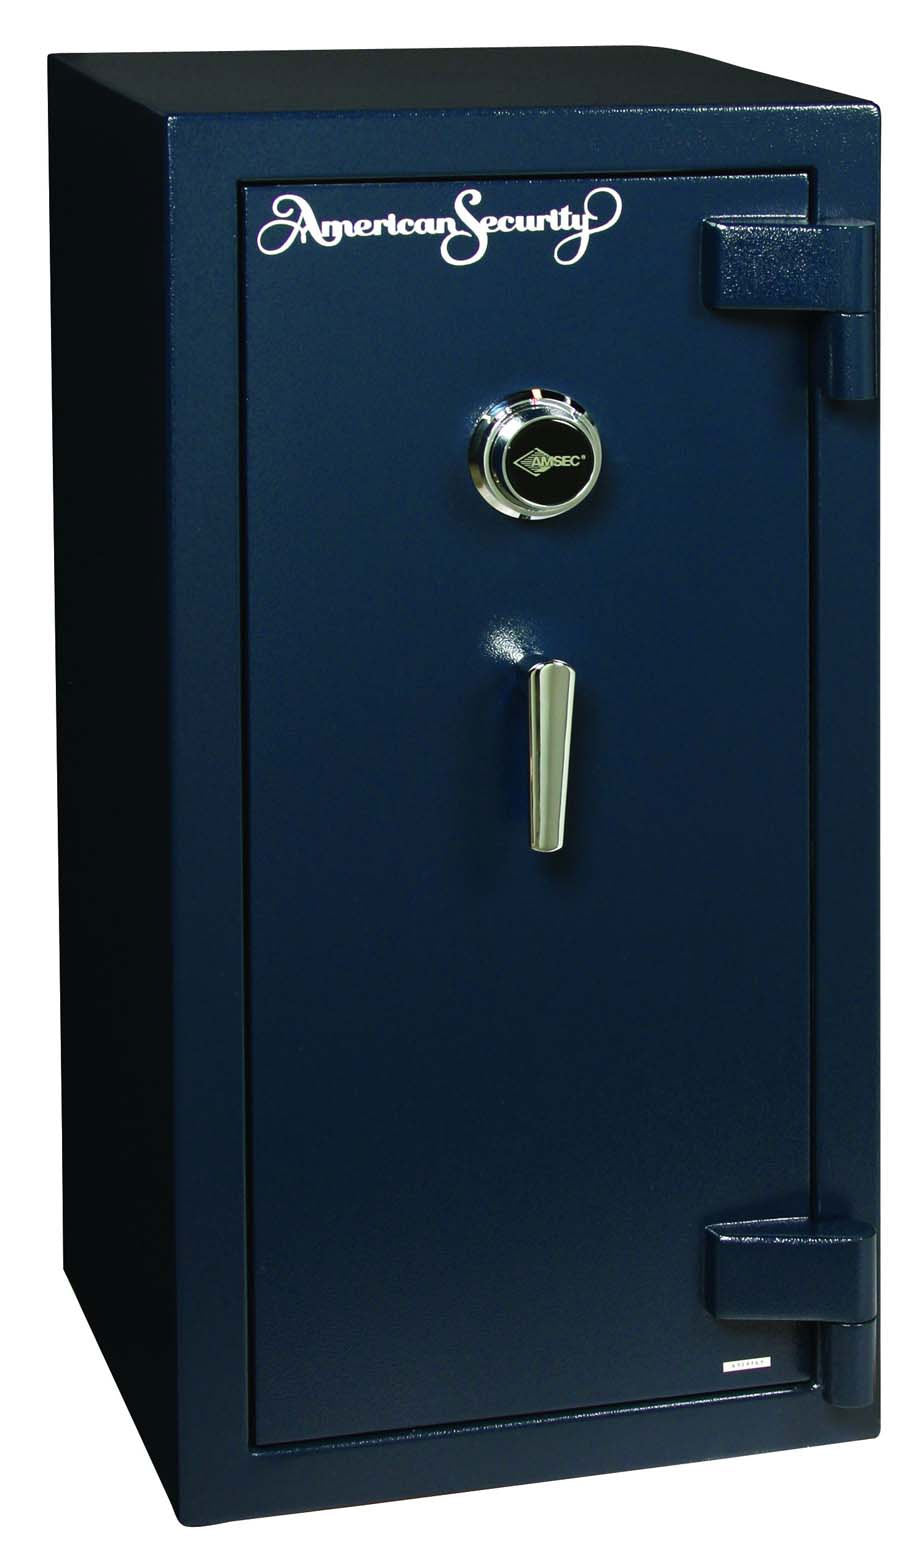 AM SERIES HOME SECURITY SAFES